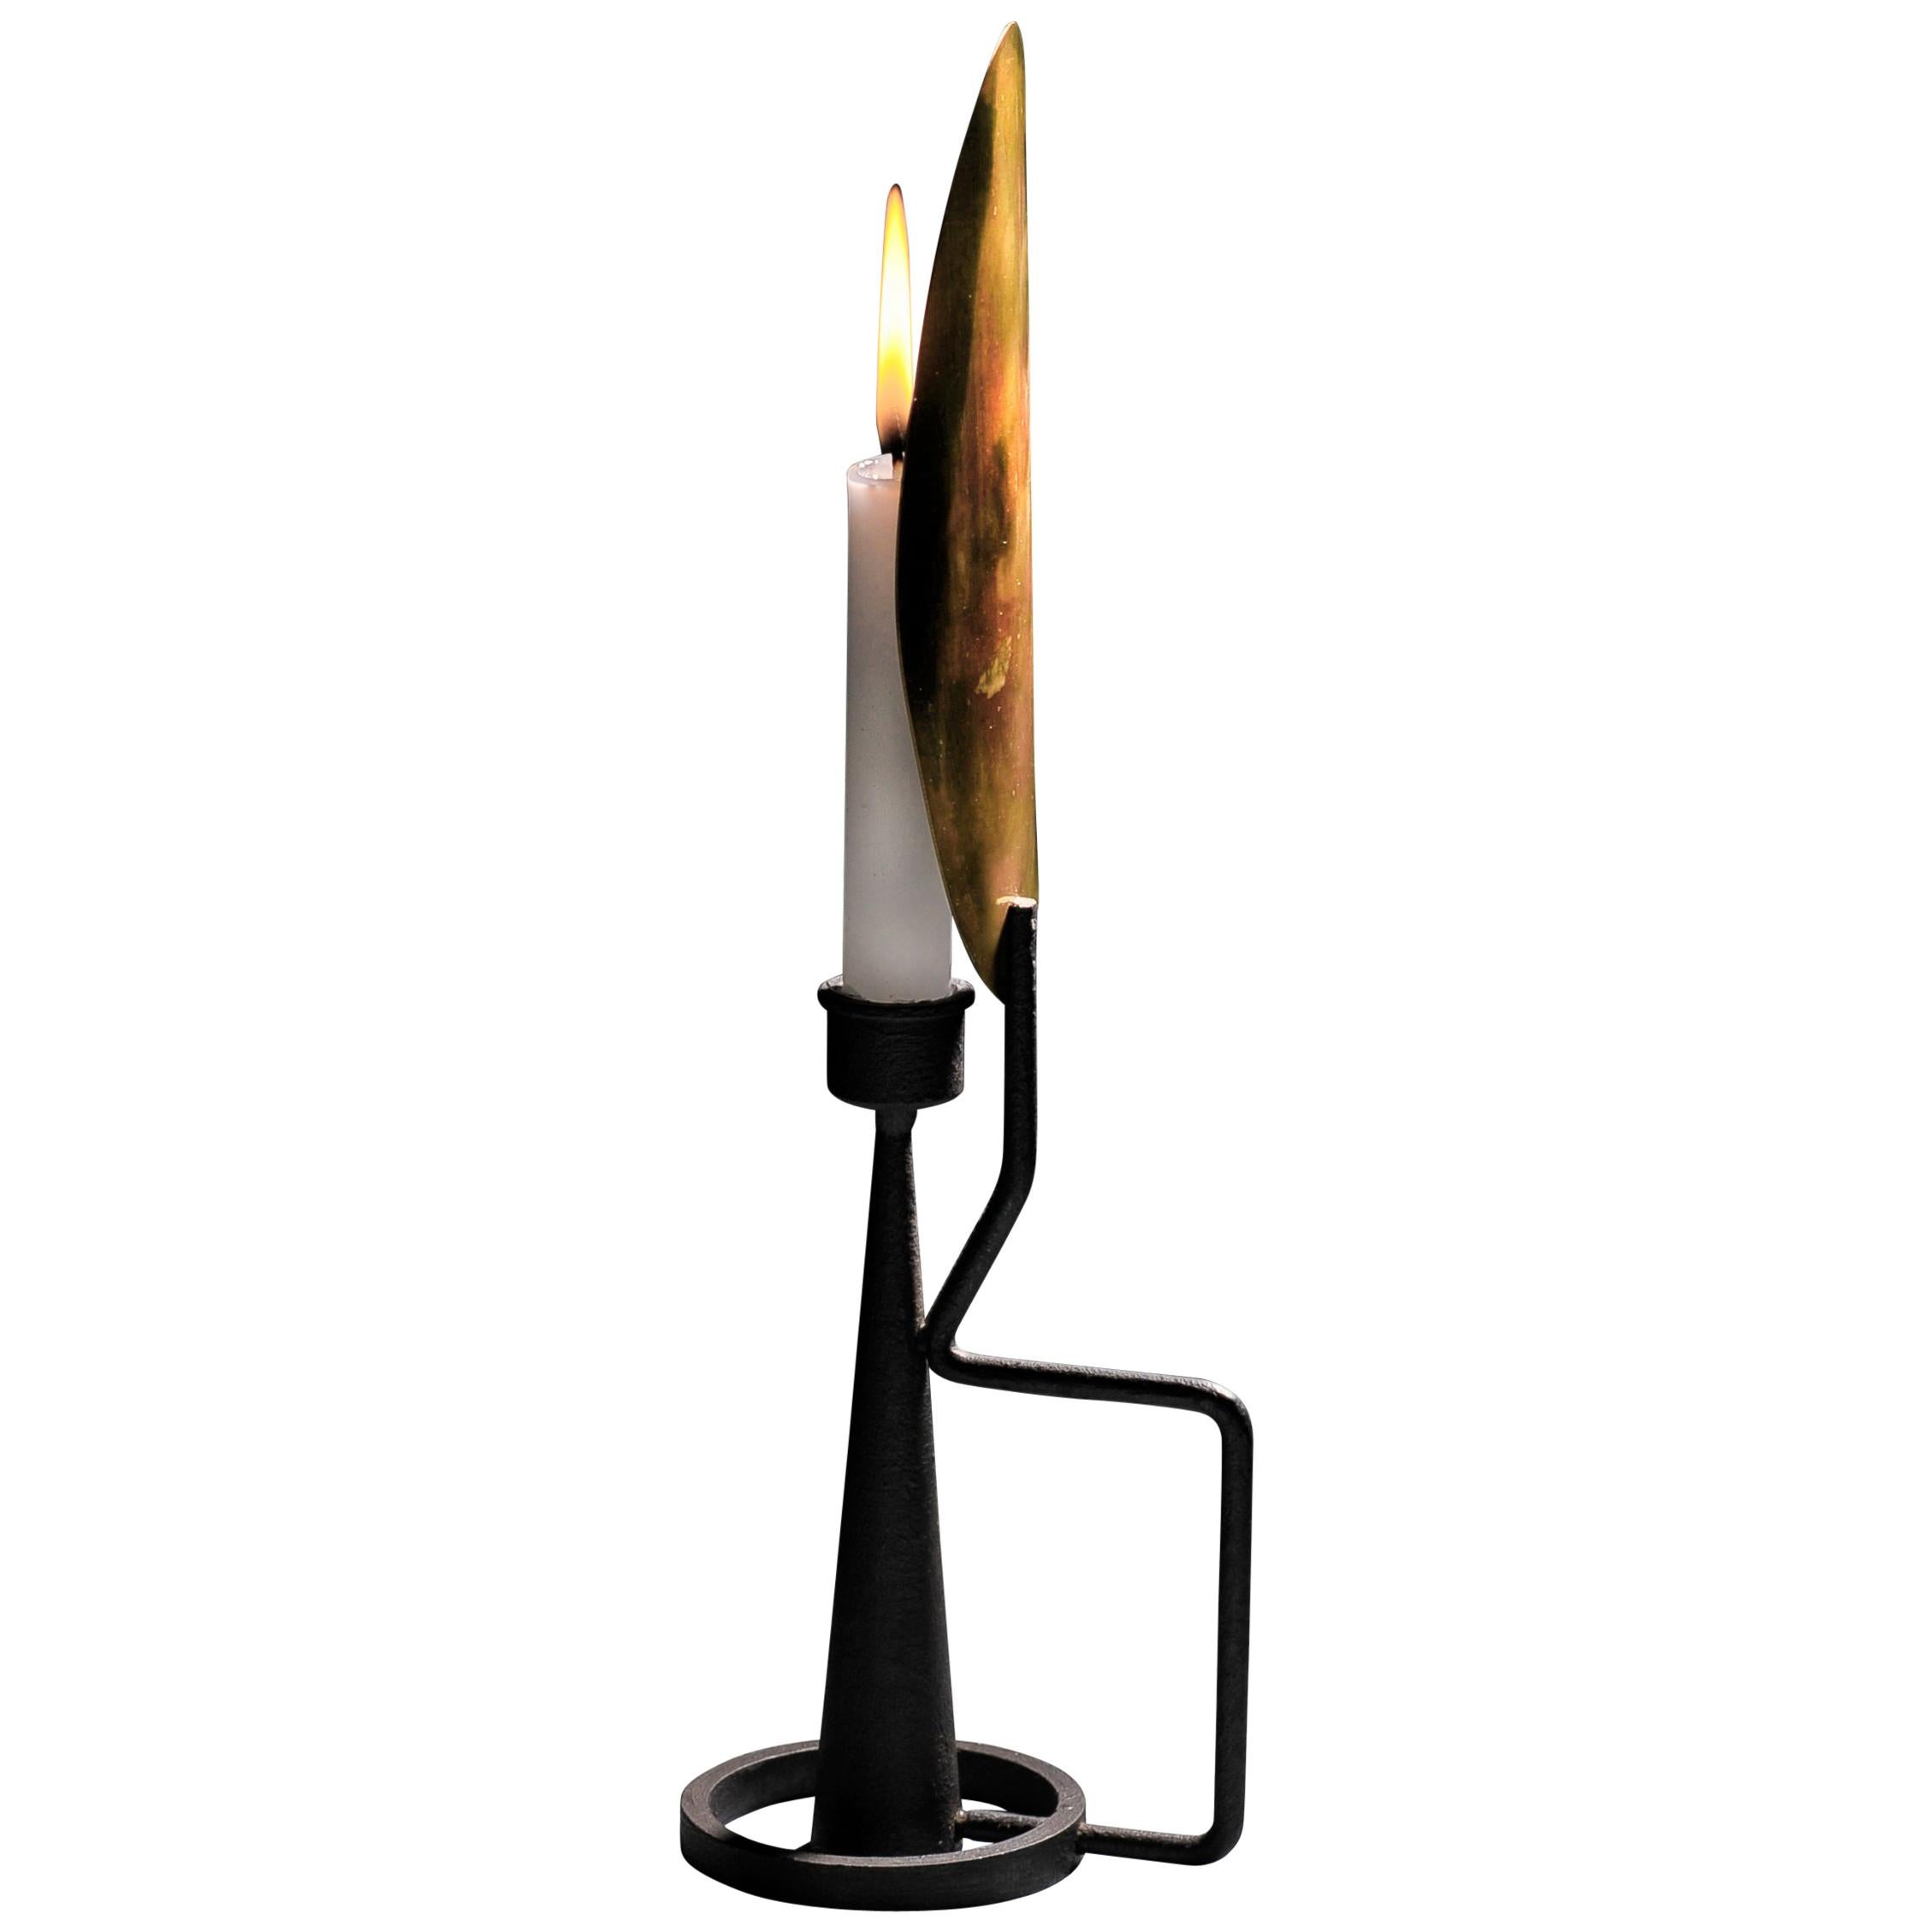 Unique Sculpted Steel Candleholder “Feather”, Signed by Lukasz Friedrich